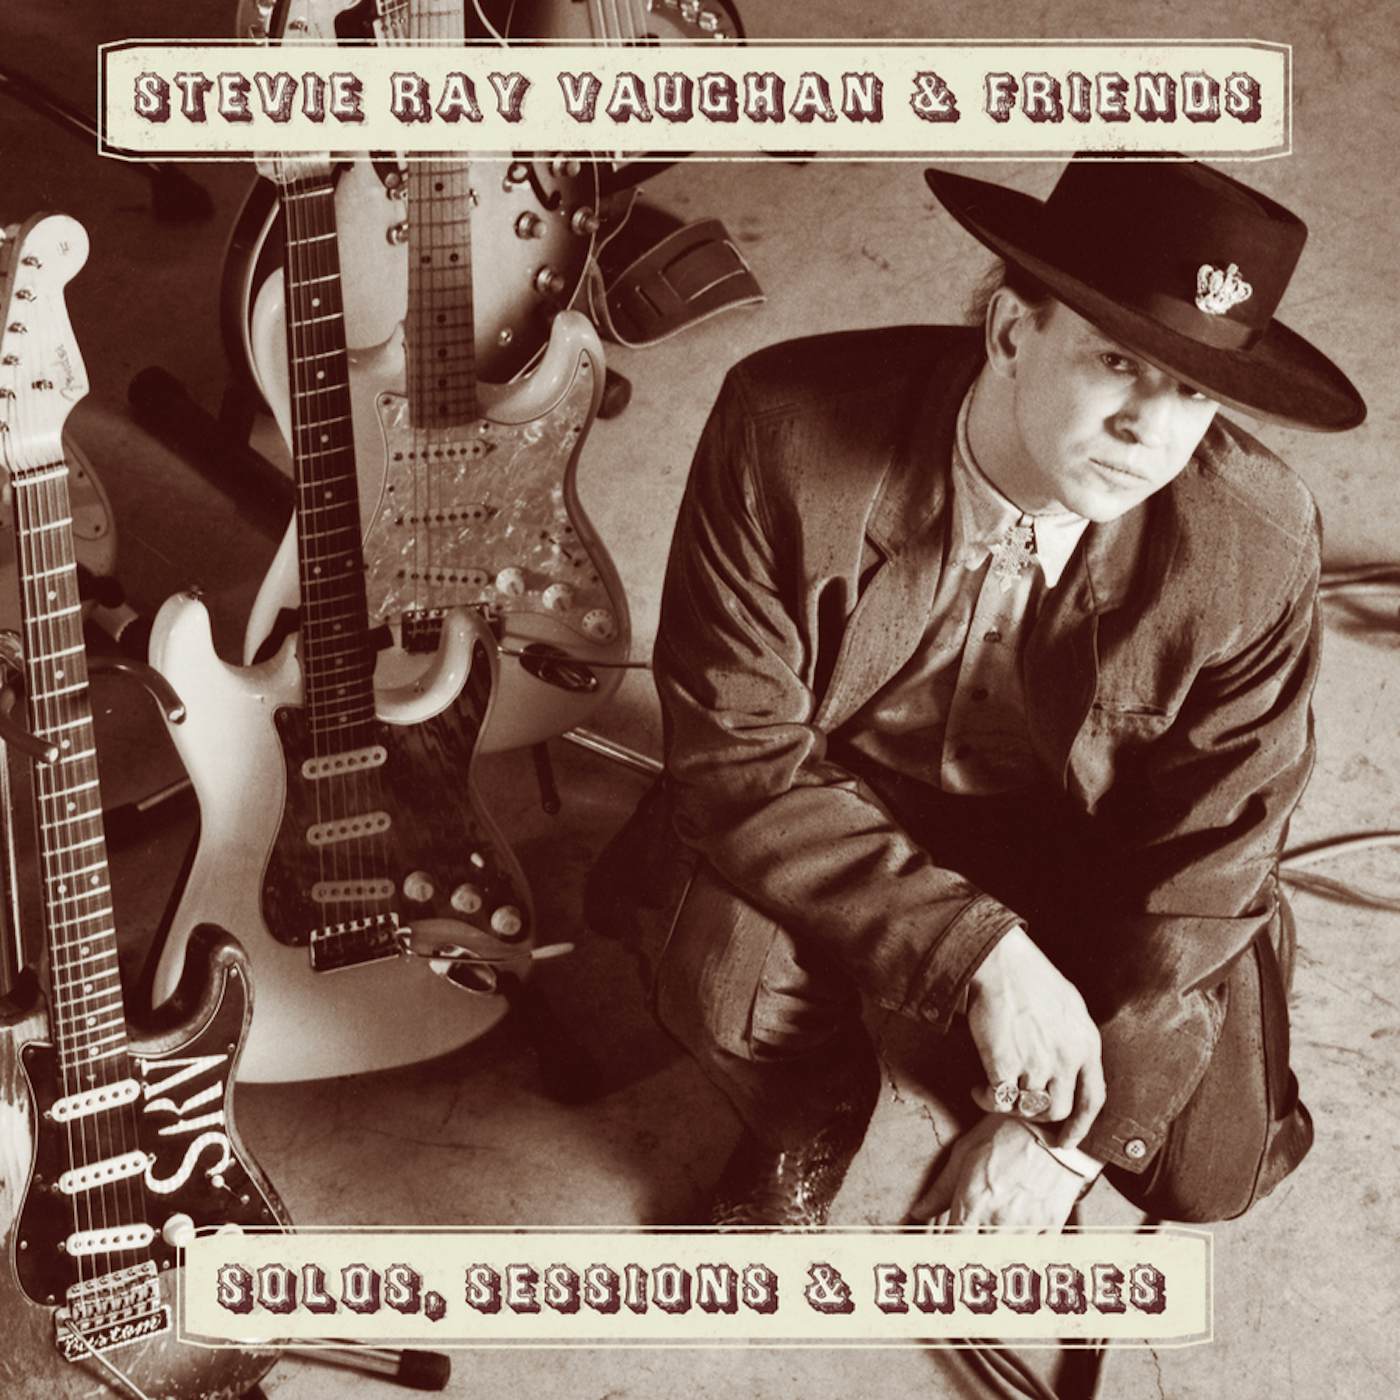 Stevie Ray Vaughan Solos, Sessions & Encores CD